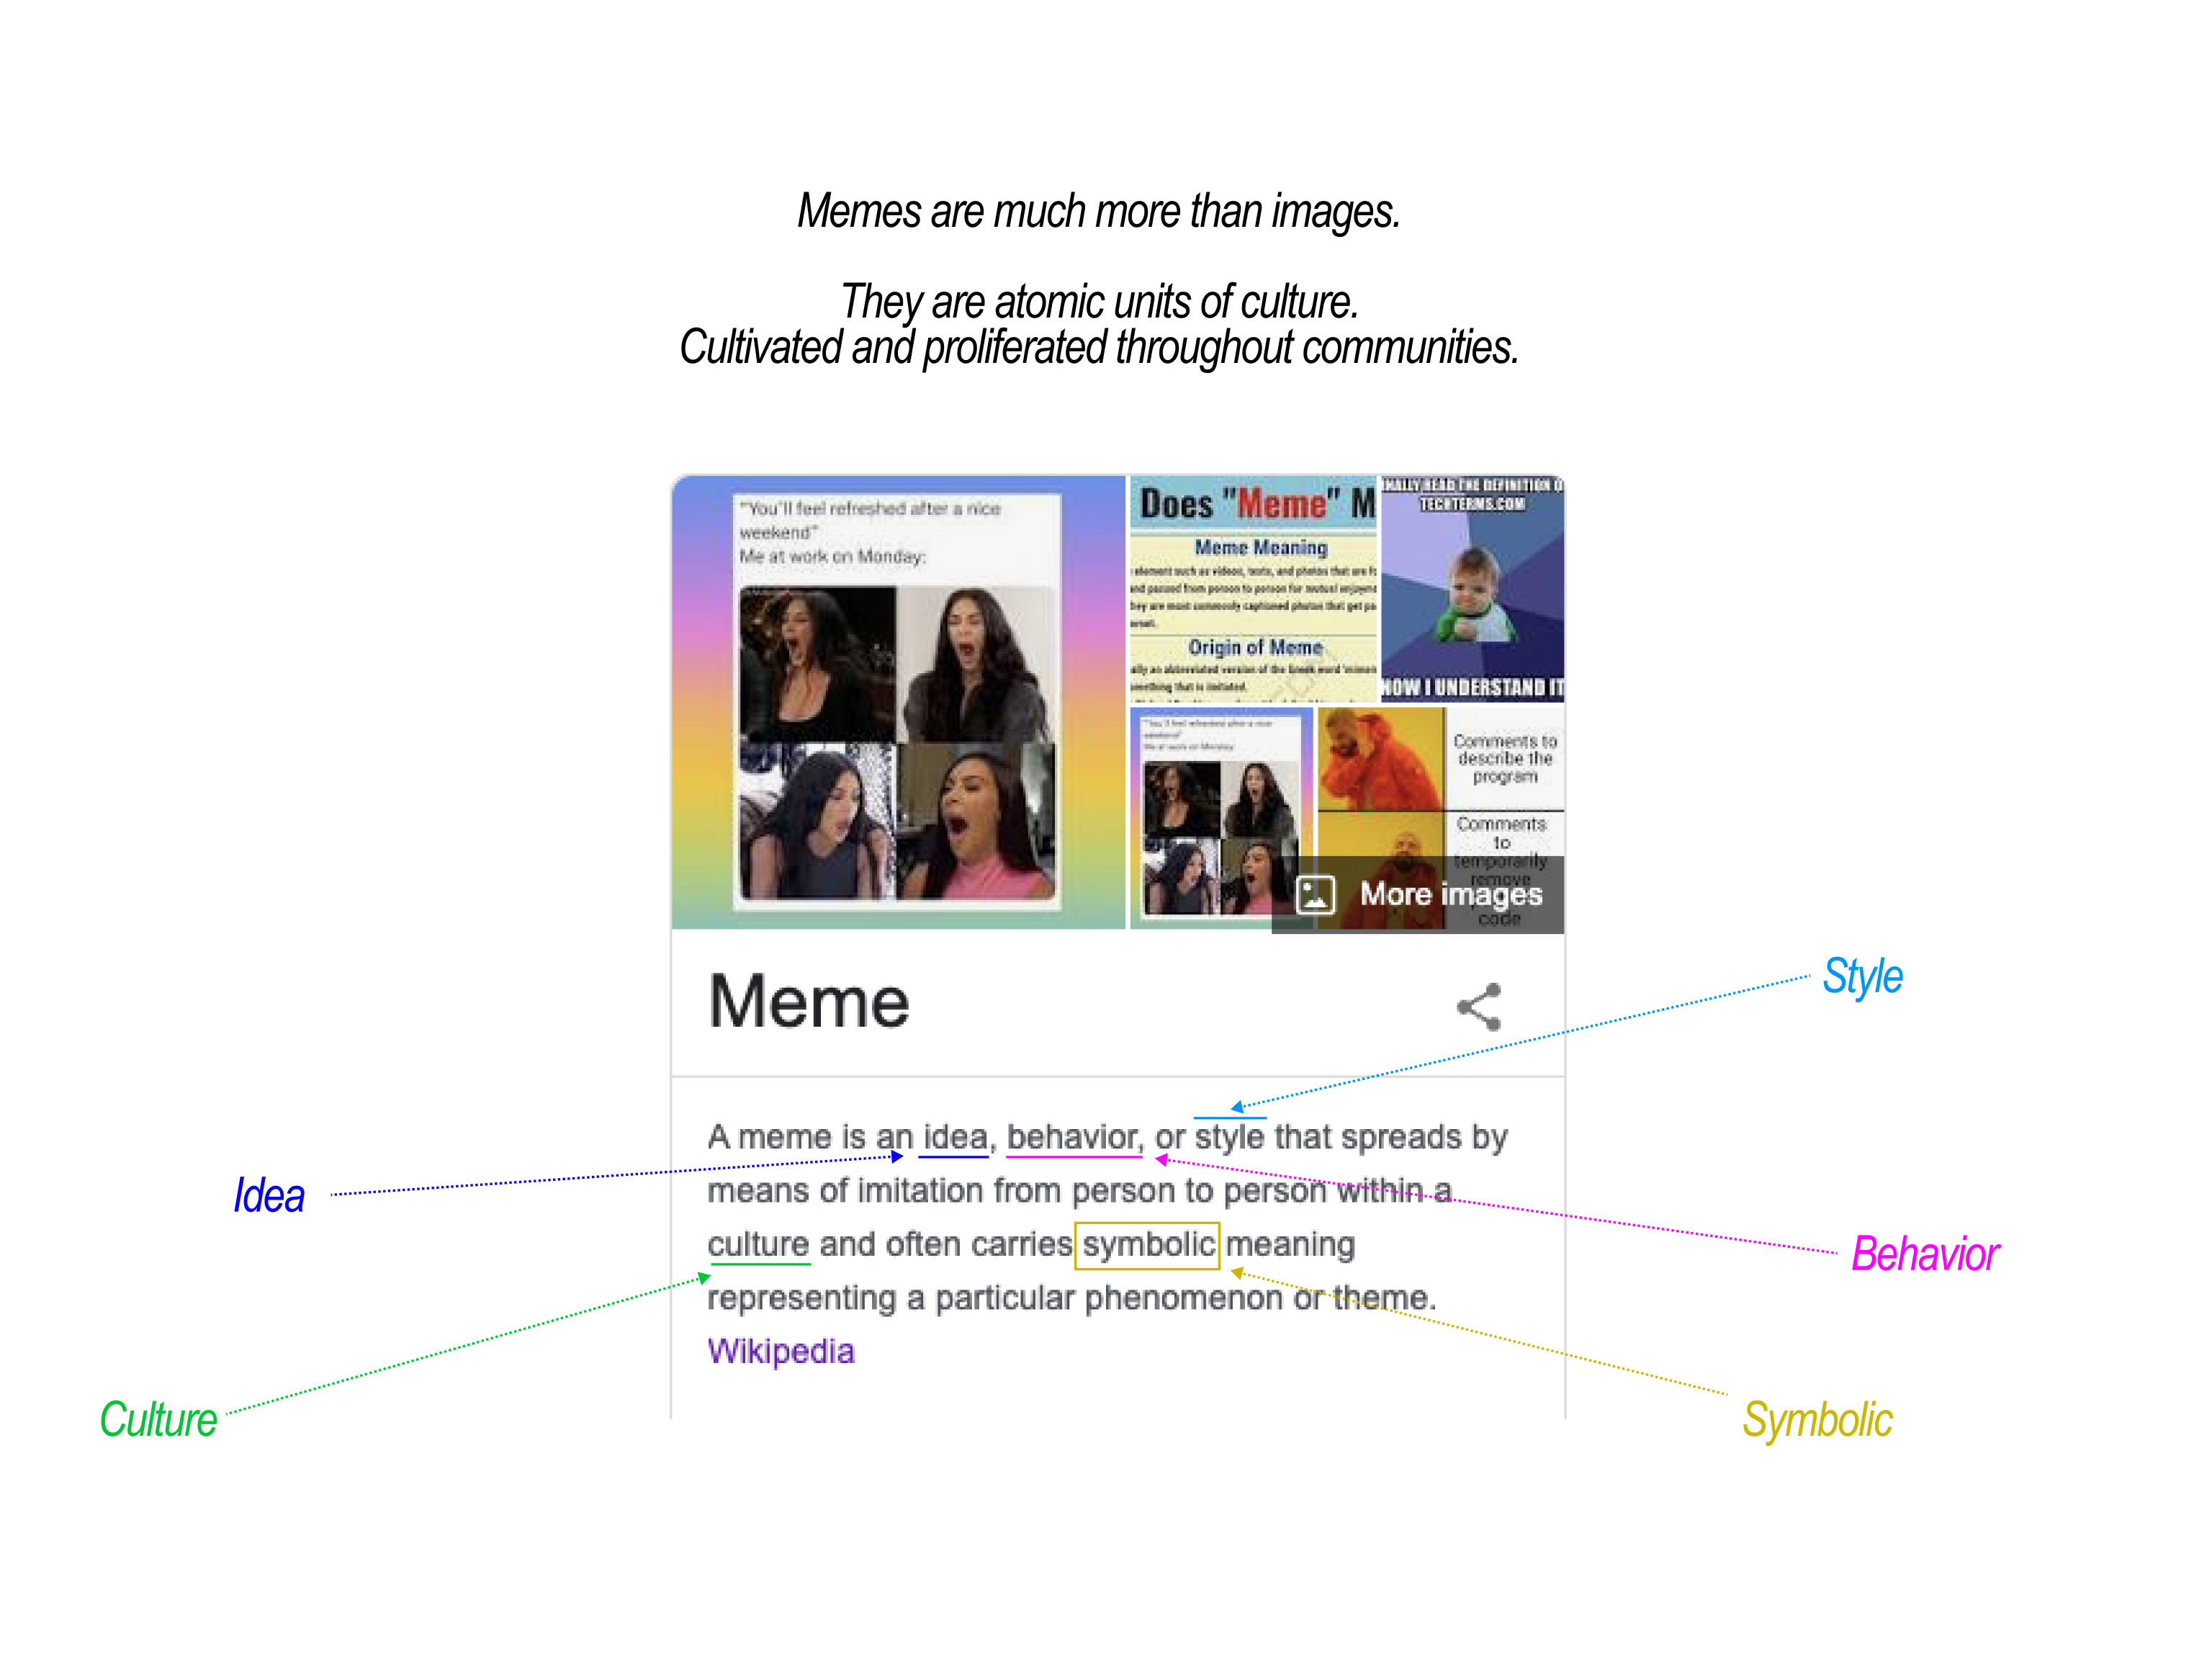 Illustrating the full meaning of memes: ideas, cultures, styles, behaviors and symbols.